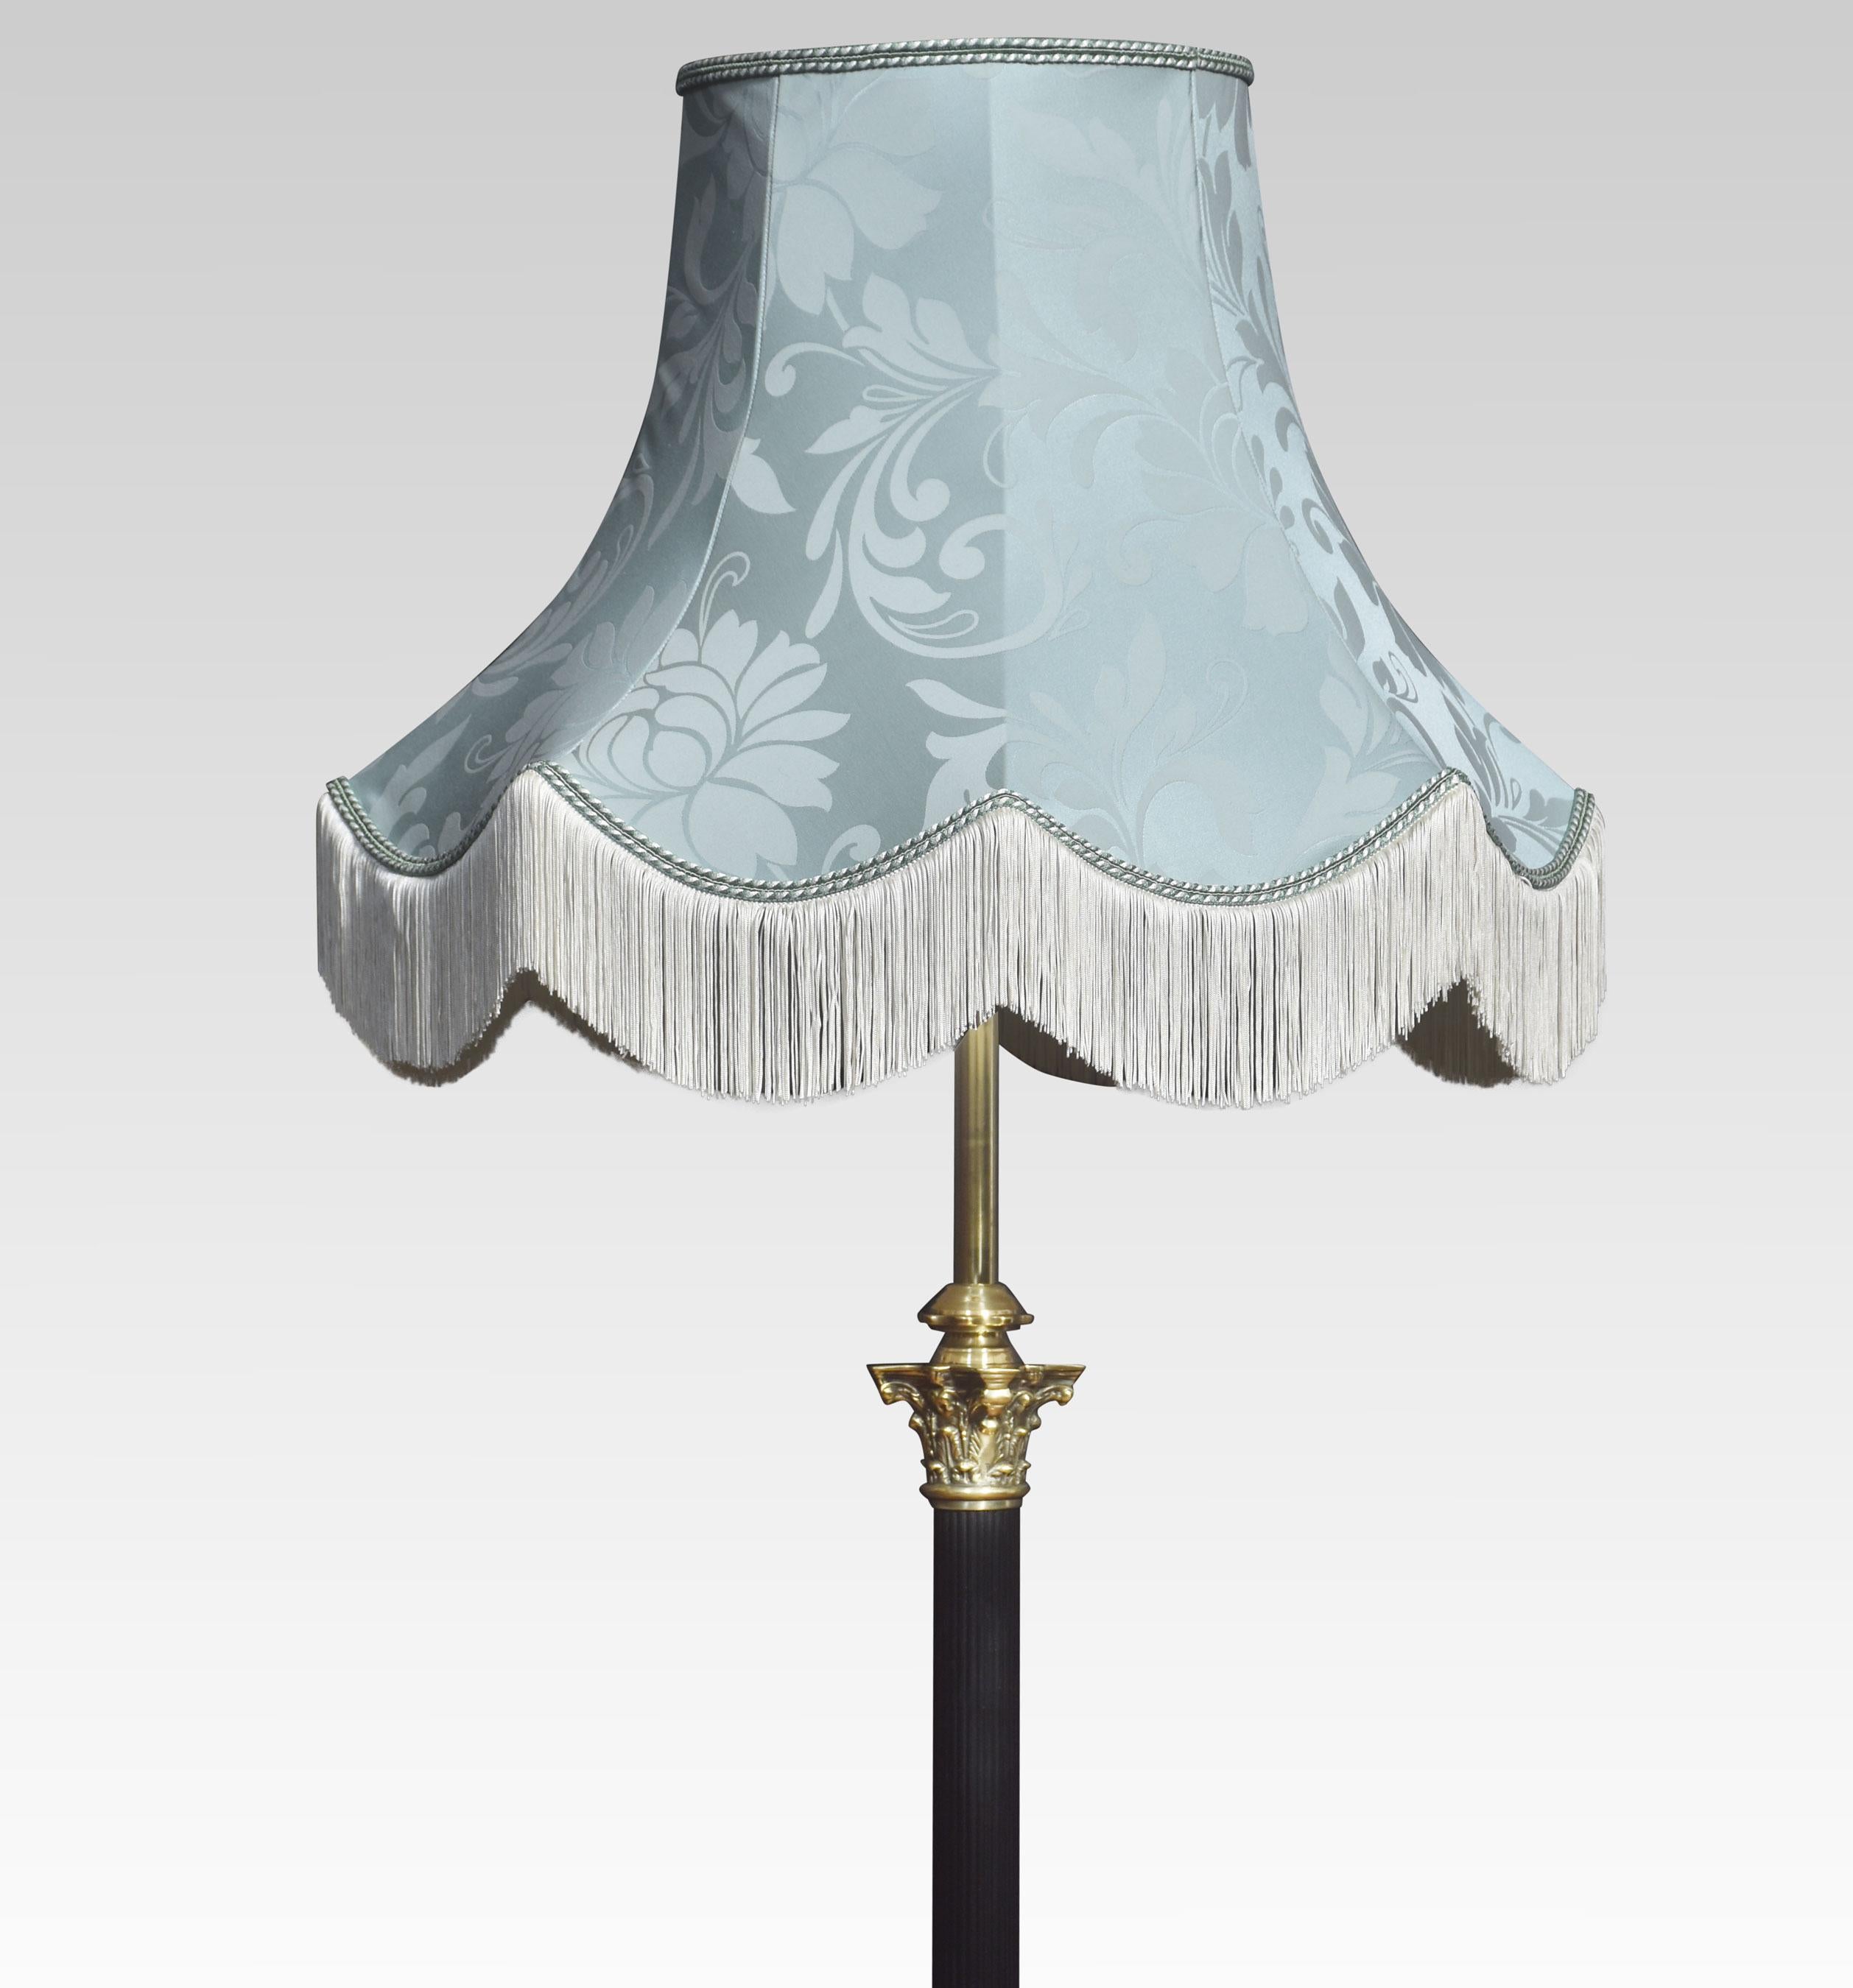 Brass standard lamp. Having a Corinthian column and adjustable stem, raised up on a stepped square base terminating in paw feet. Converted for electricity.
Dimensions
Height 53 Inches adjustable to 72 Inches
Width 16 Inches
Depth 16 Inches